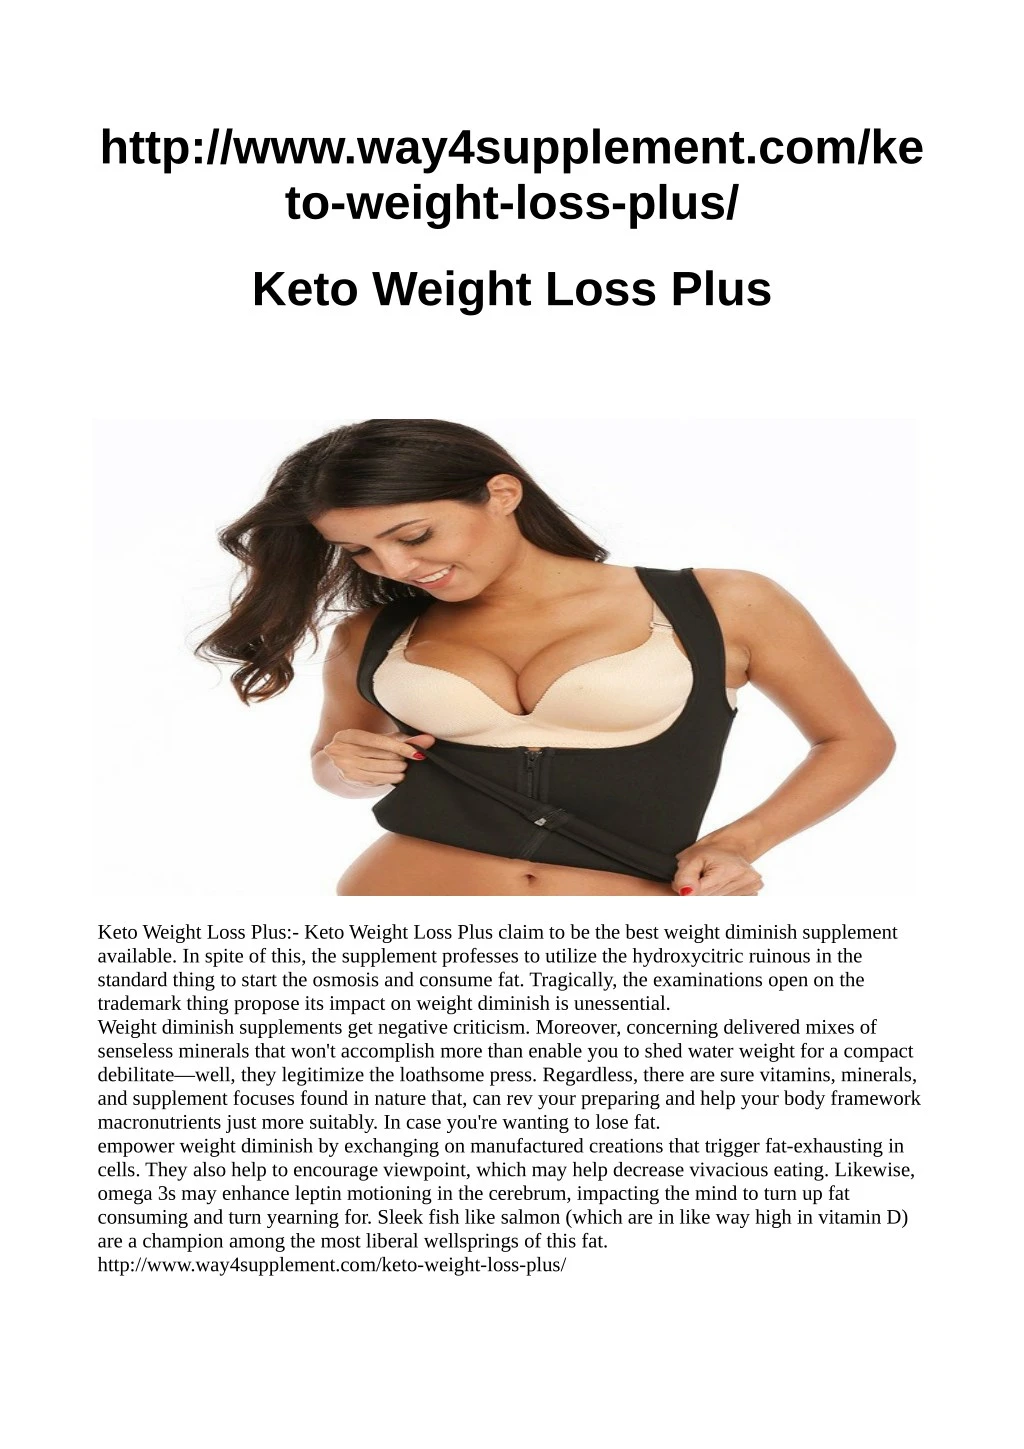 http www way4supplement com ke to weight loss plus